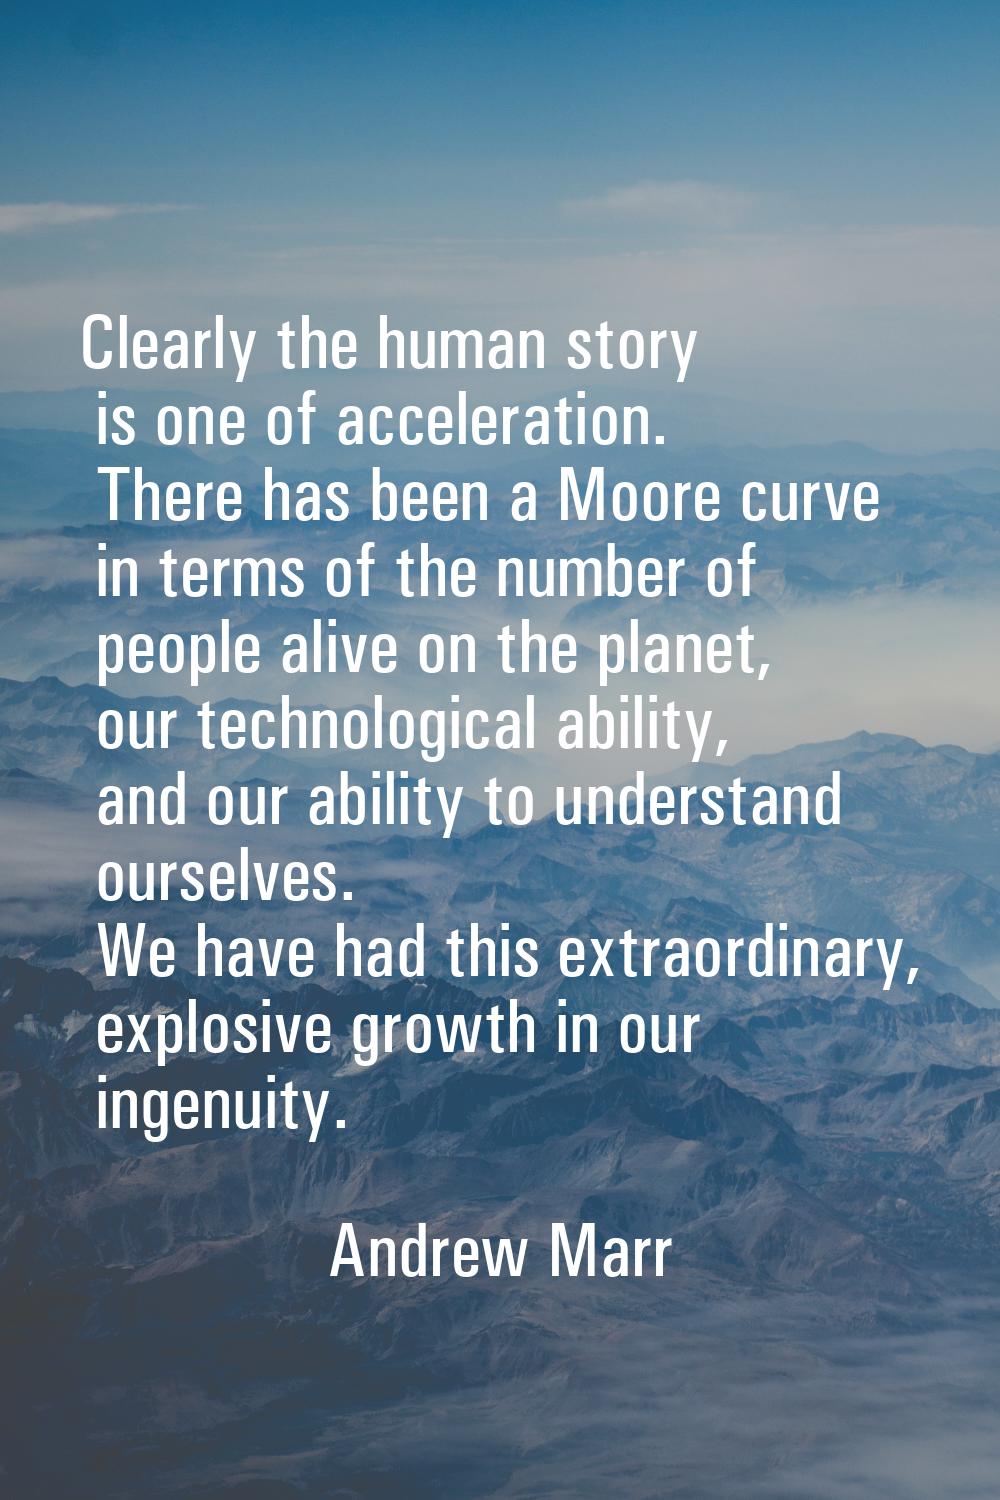 Clearly the human story is one of acceleration. There has been a Moore curve in terms of the number